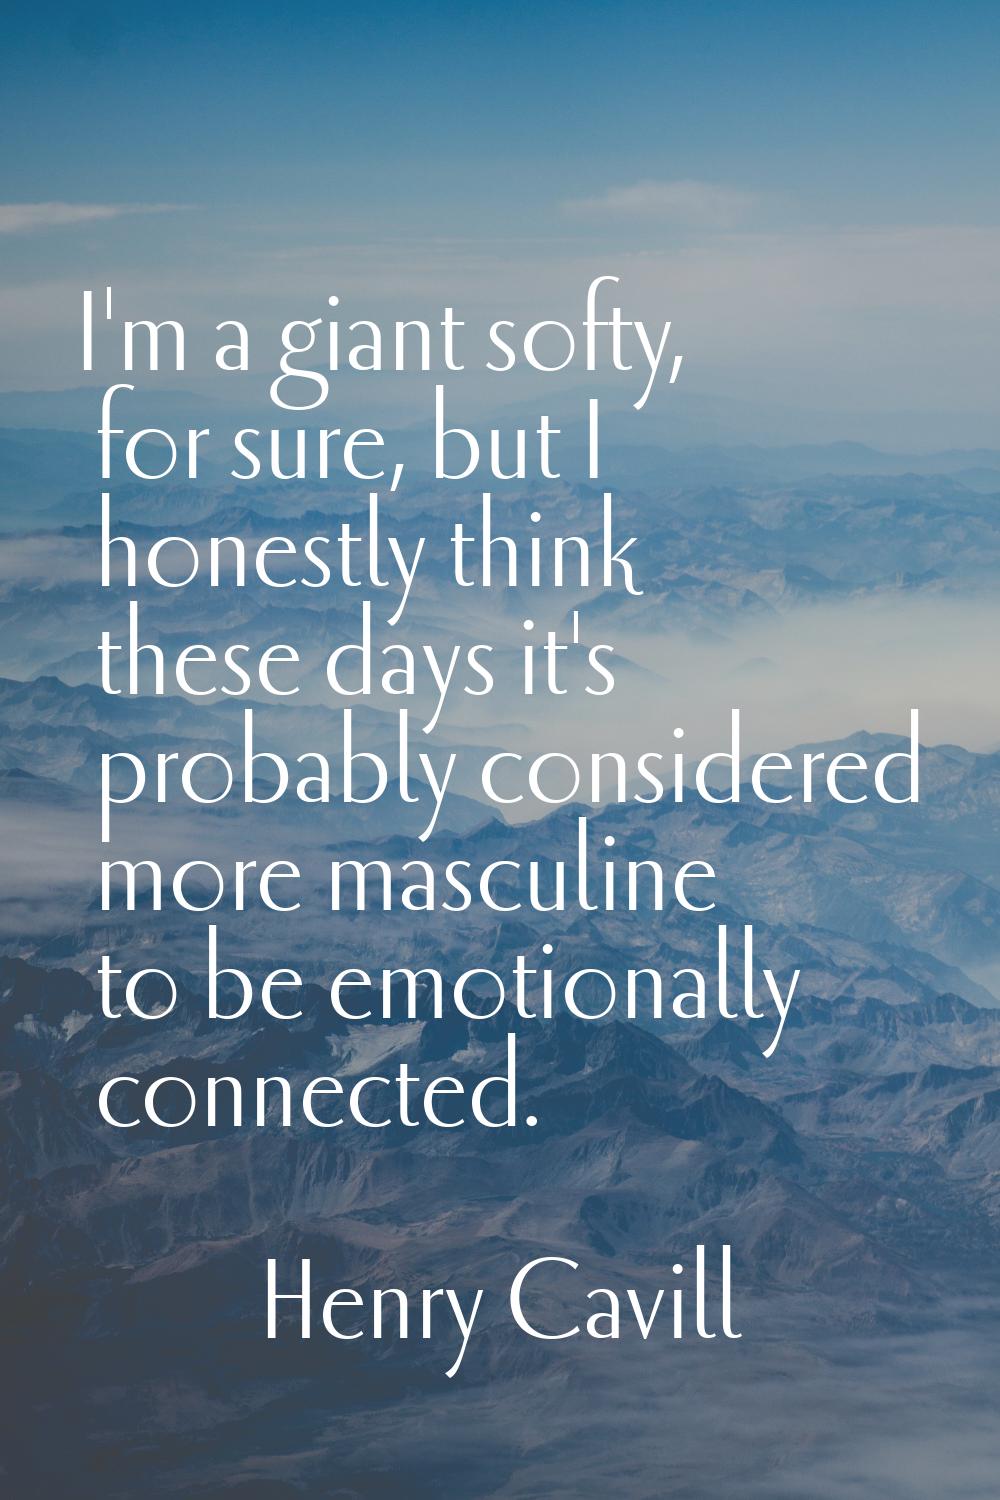 I'm a giant softy, for sure, but I honestly think these days it's probably considered more masculin